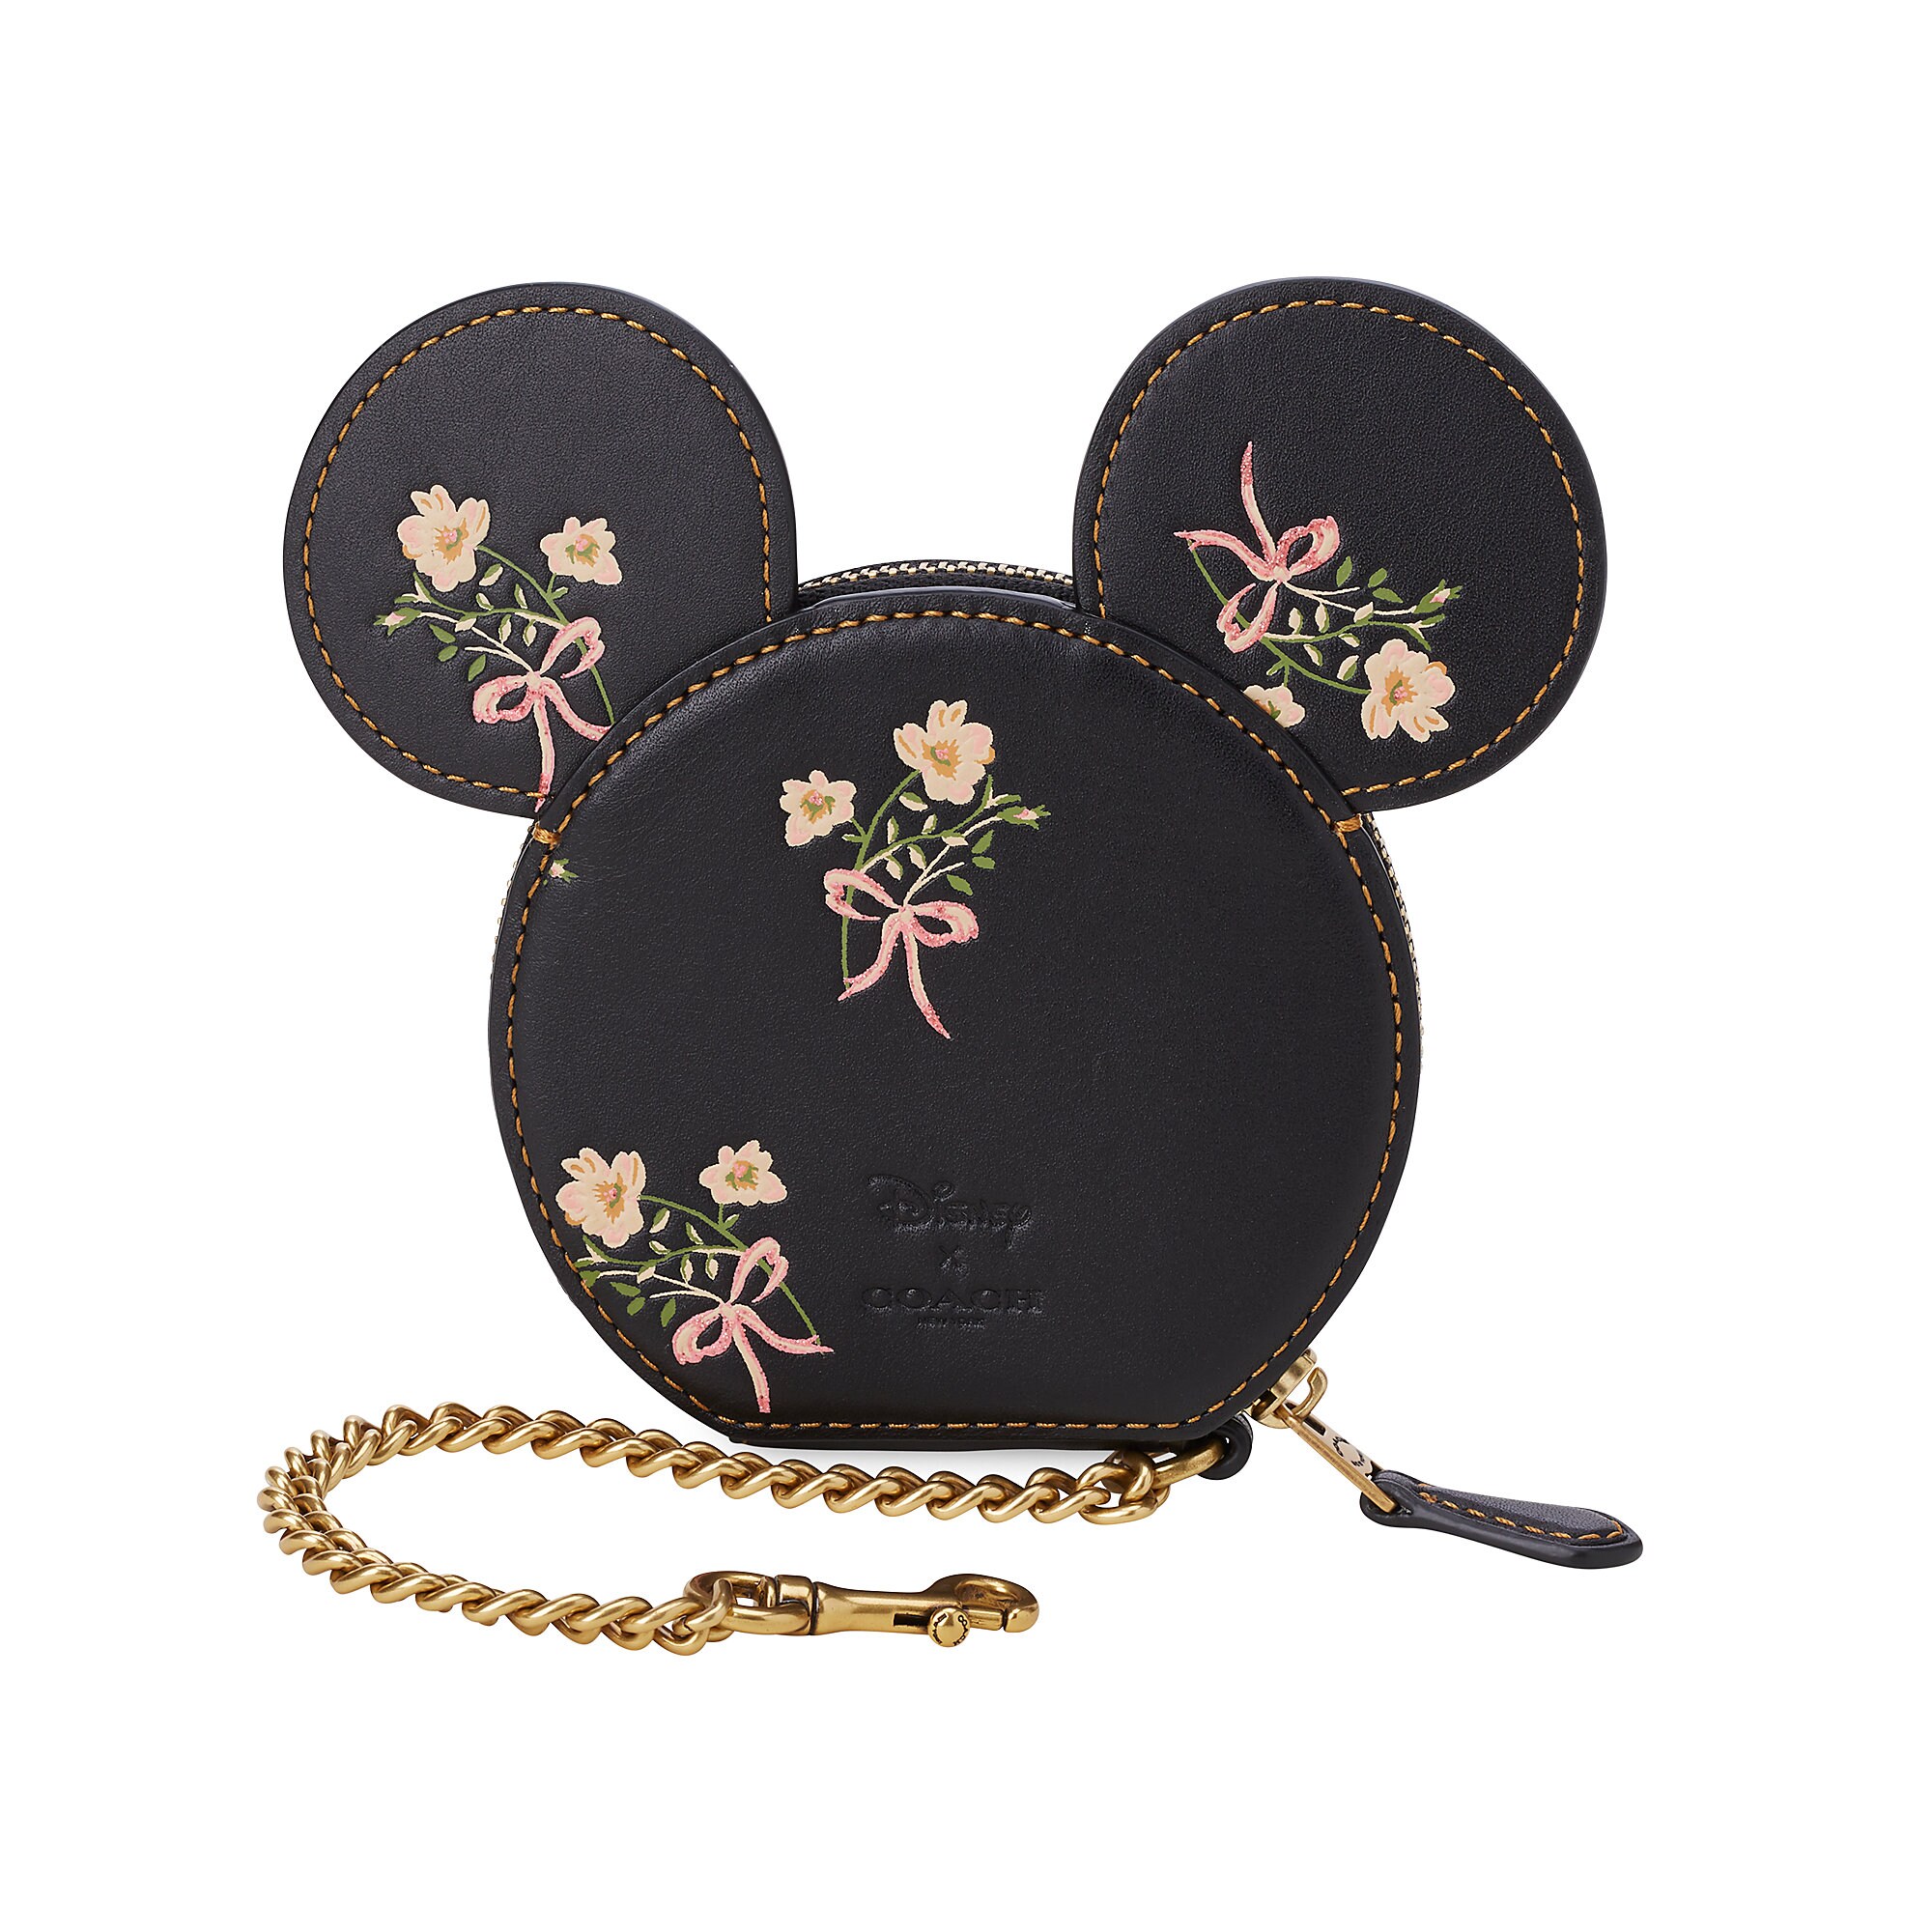 Minnie Mouse Floral Coin Purse by COACH - Black